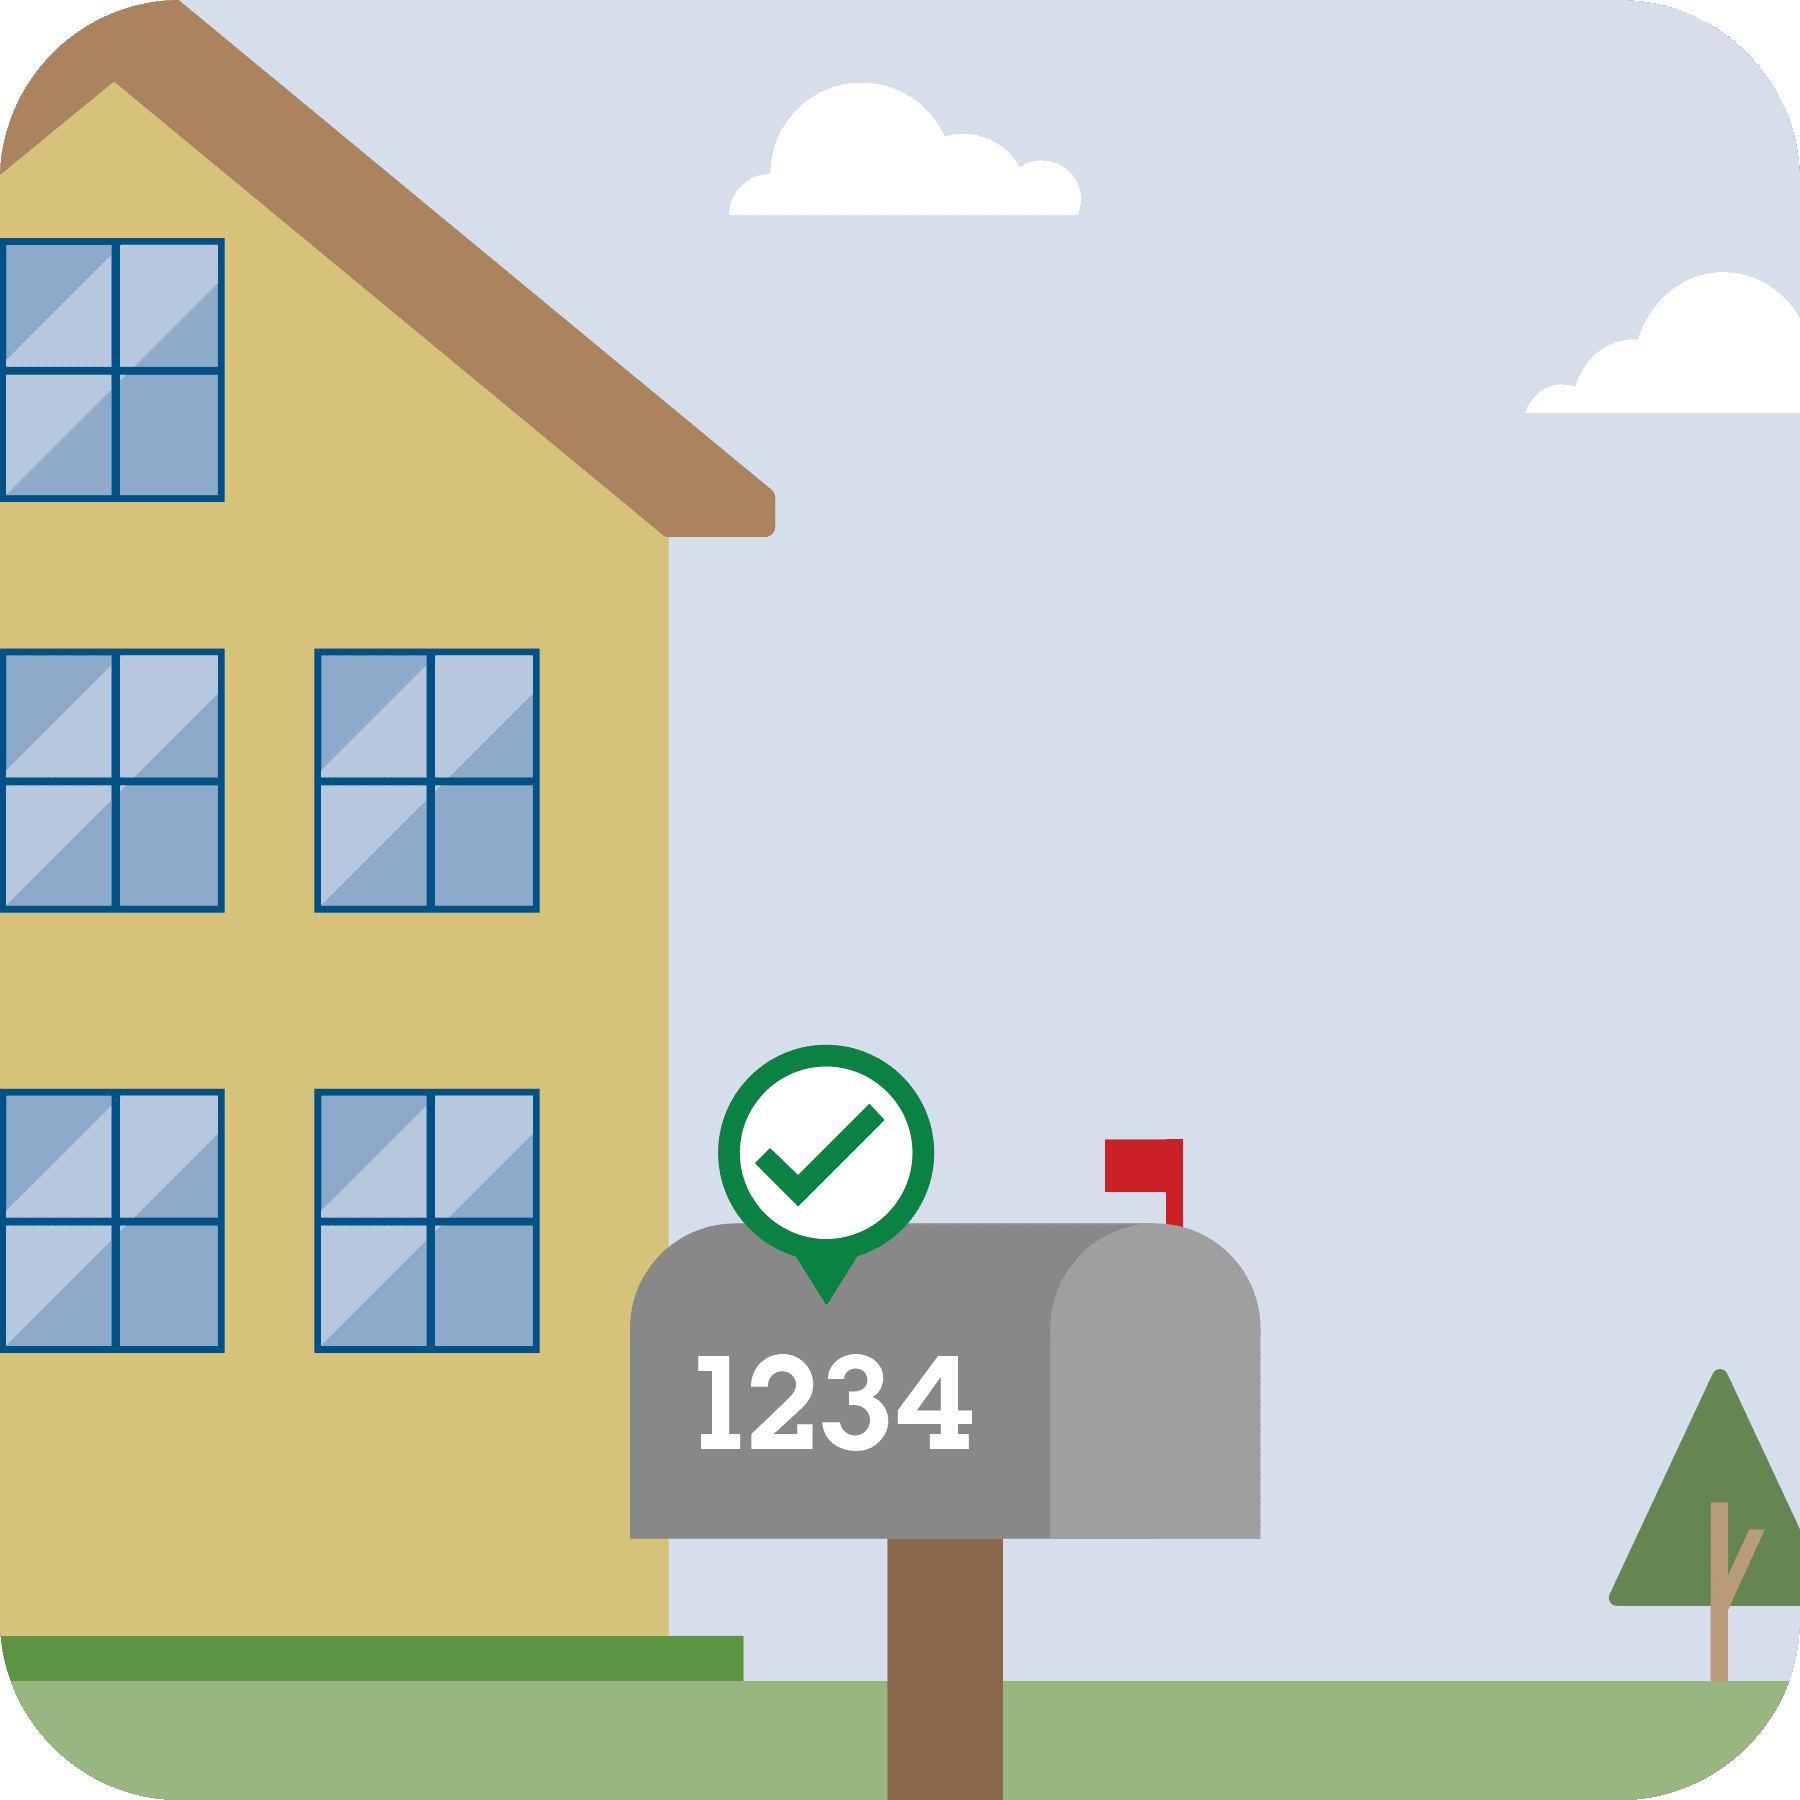 A mail box with a visible house number on it.